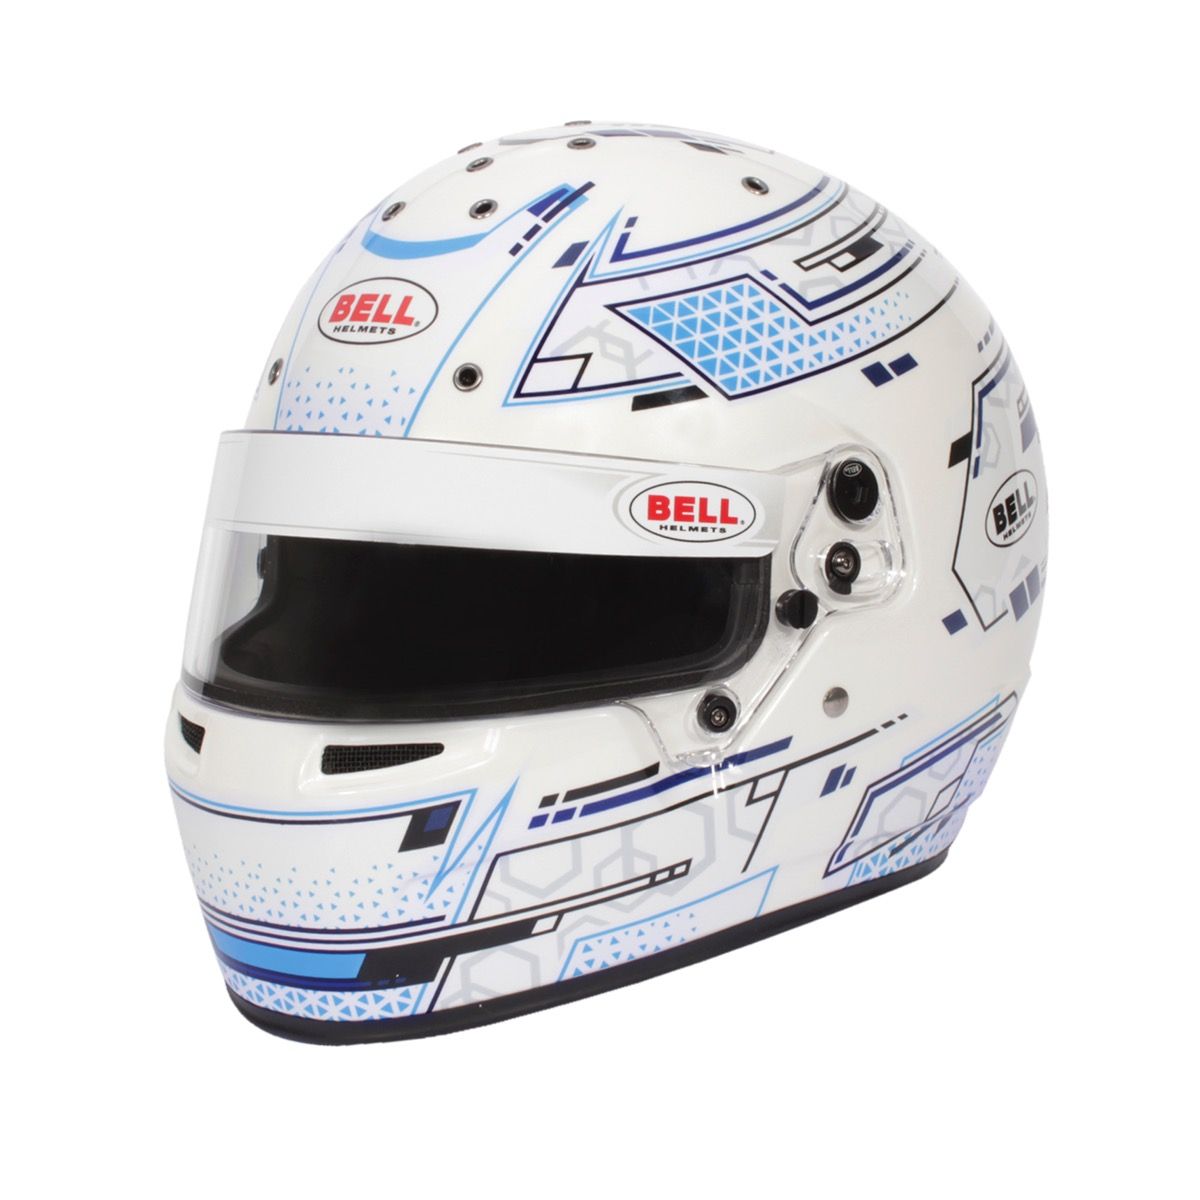 Bell Helmets - Bell RS7-K - Helmet Excellence in Racing Safety DRIVEN | Performance Products